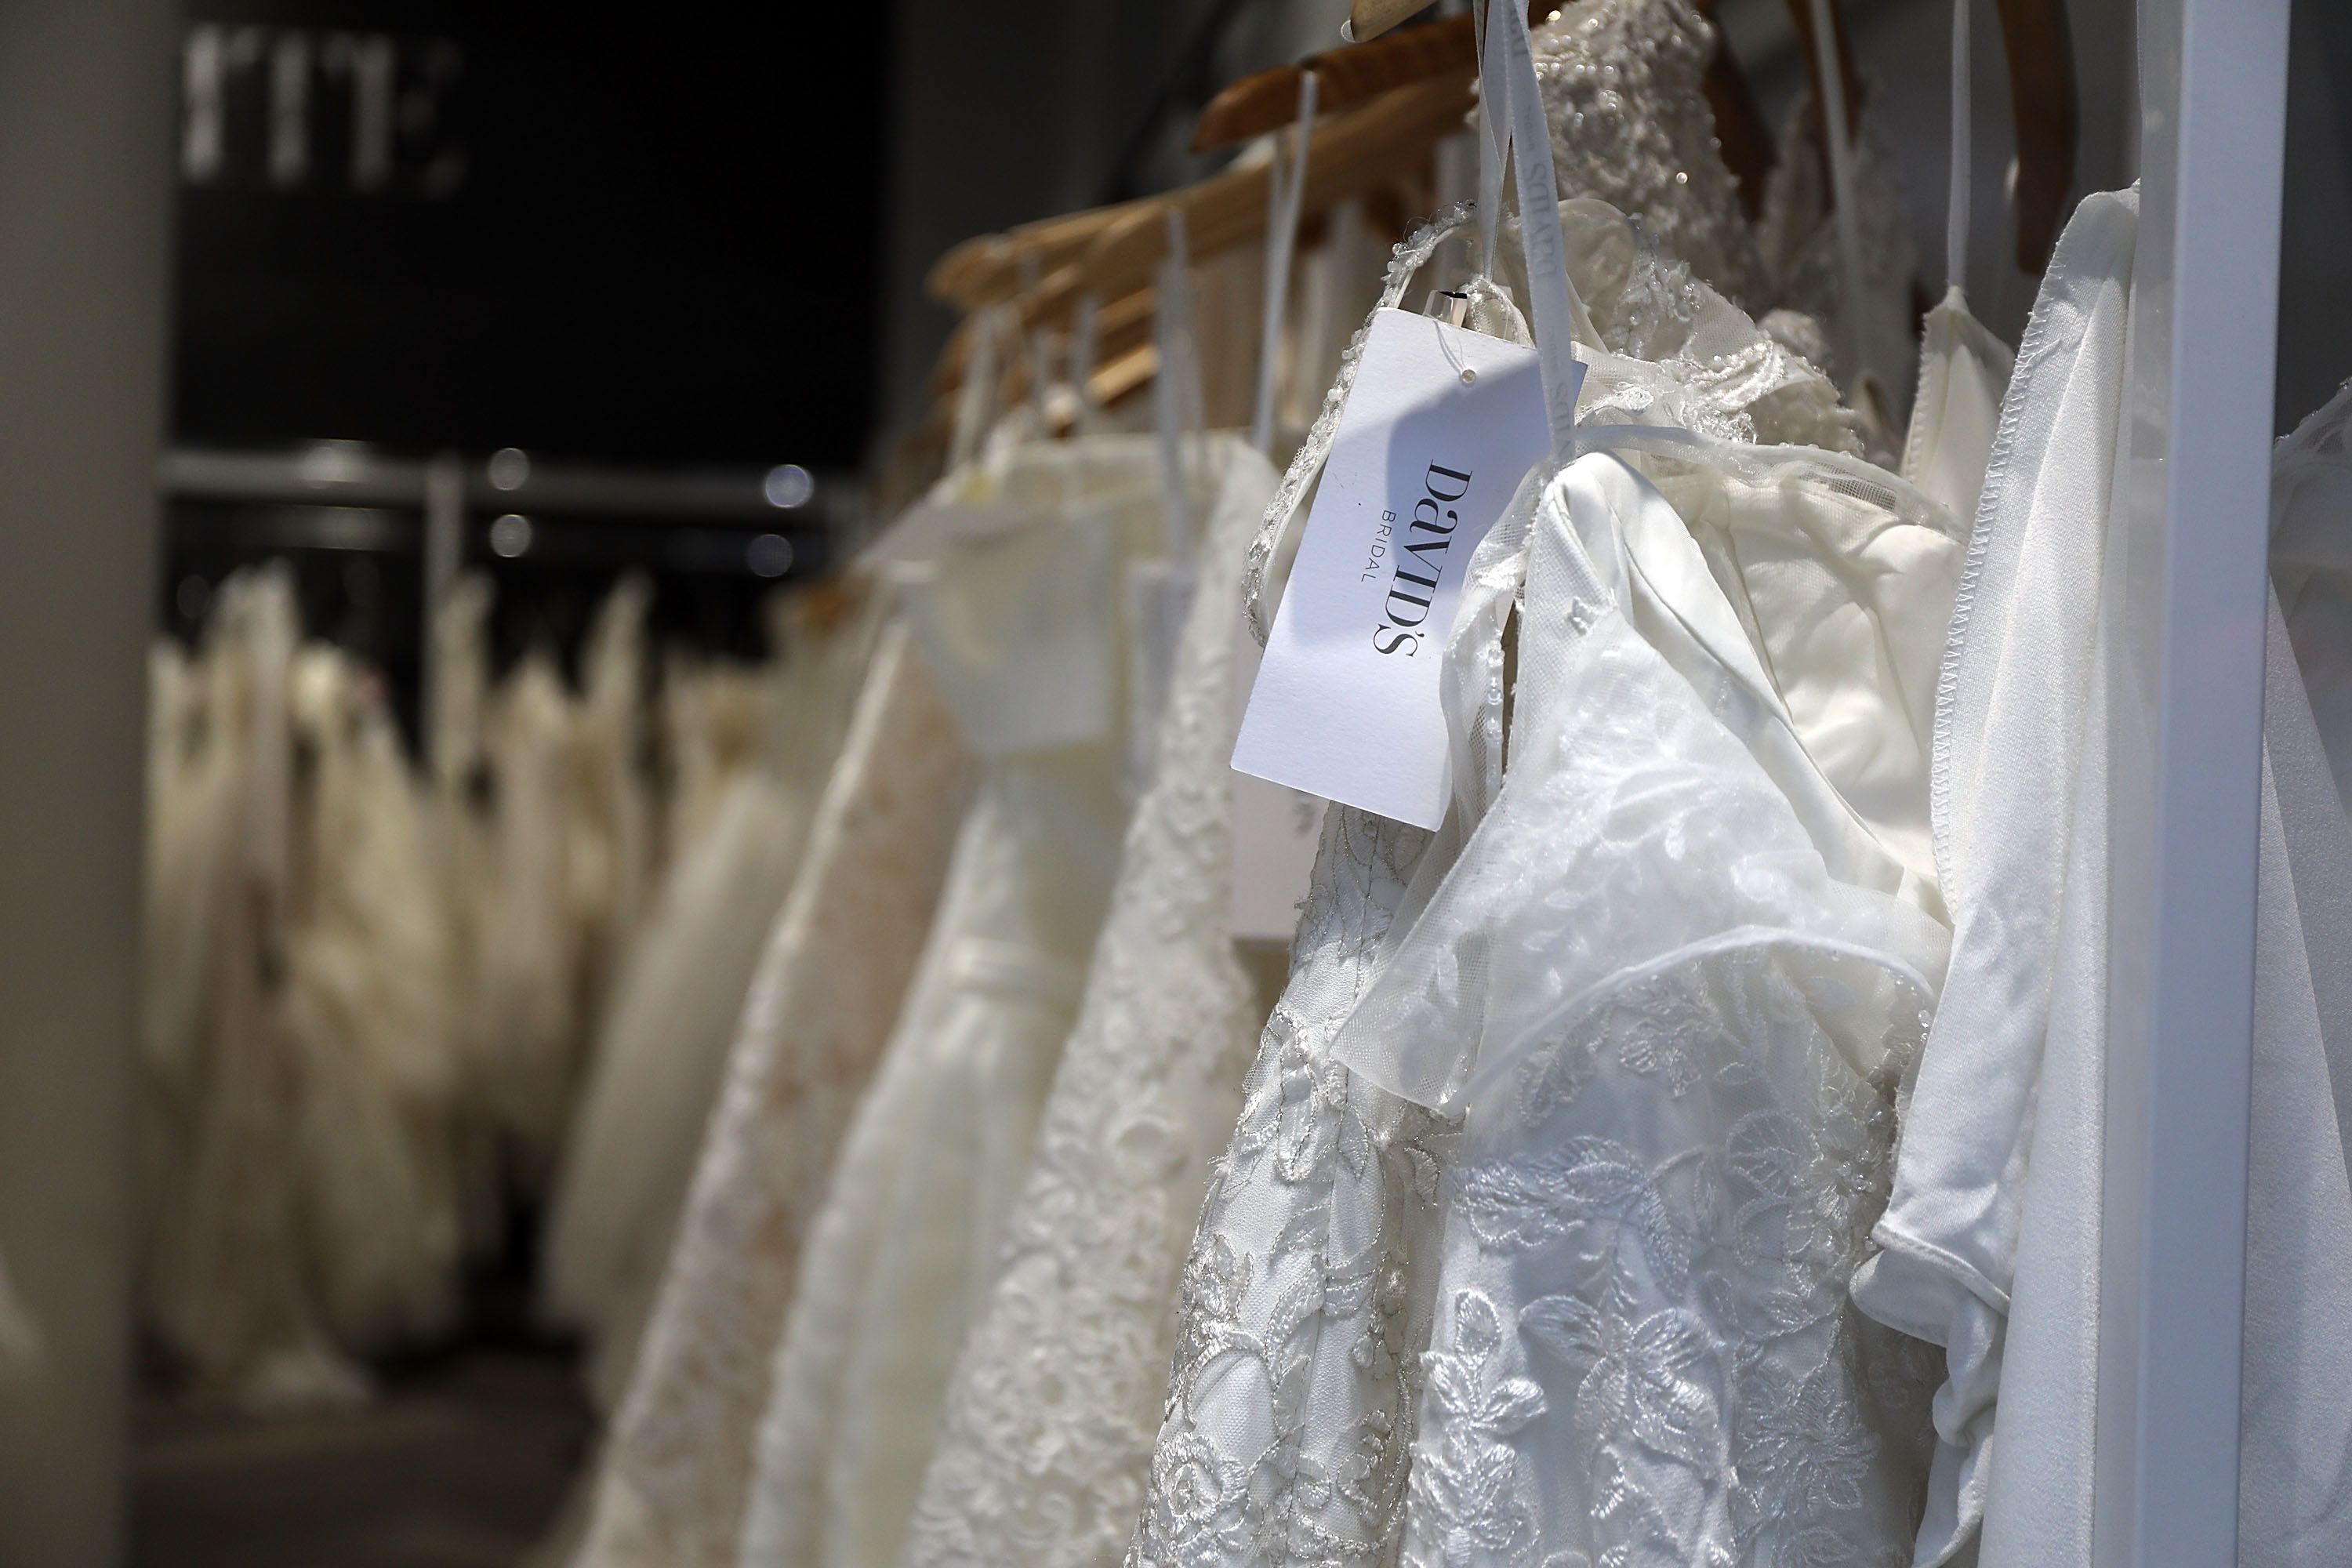 Man Slams Bridal Dress Shop Over Charge for Undergarments in Non